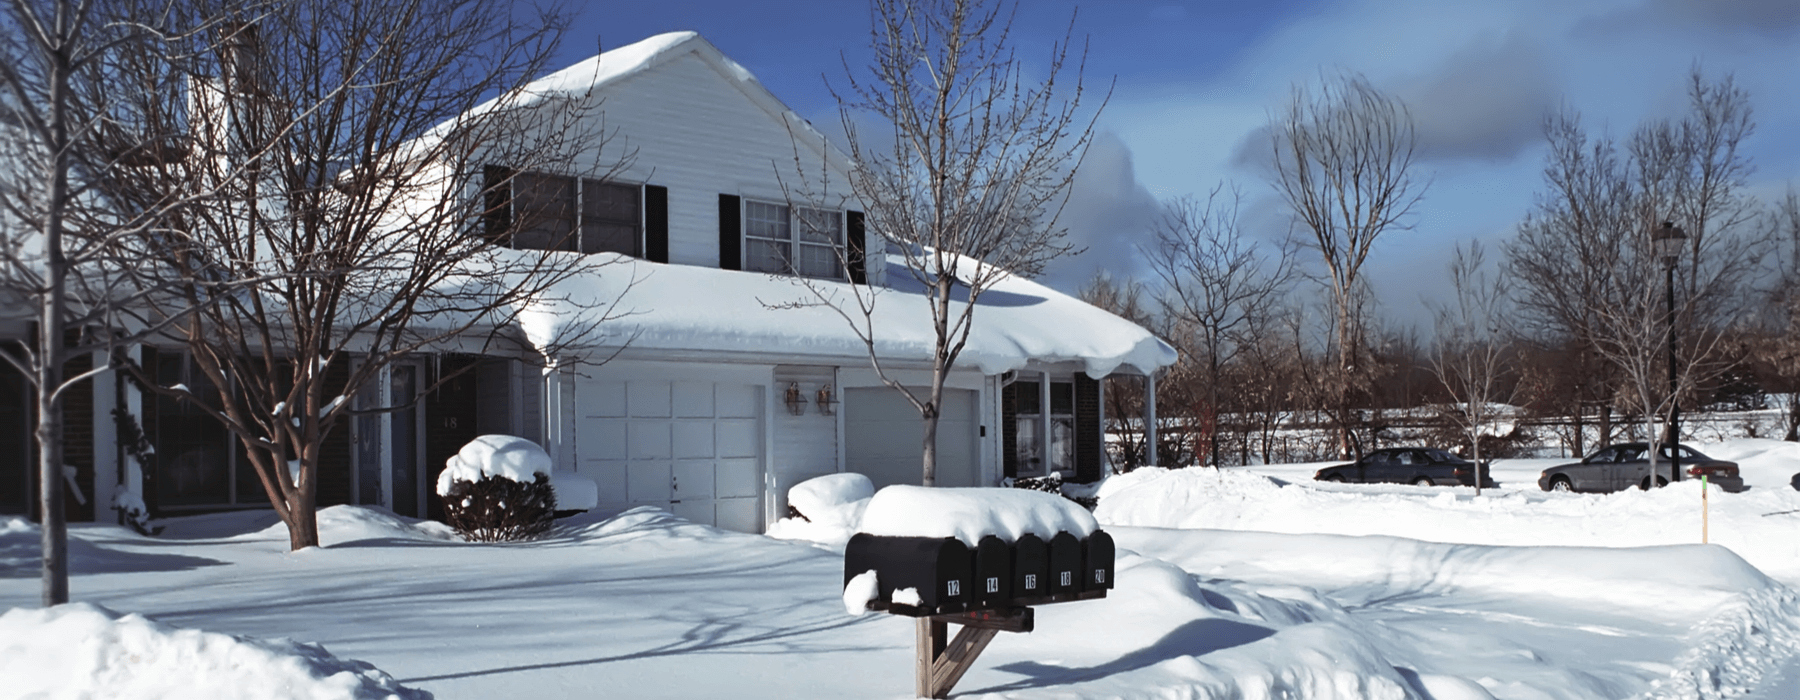 Tips To Help Protect Your House From Heat Loss Next Winter | NY Engineers